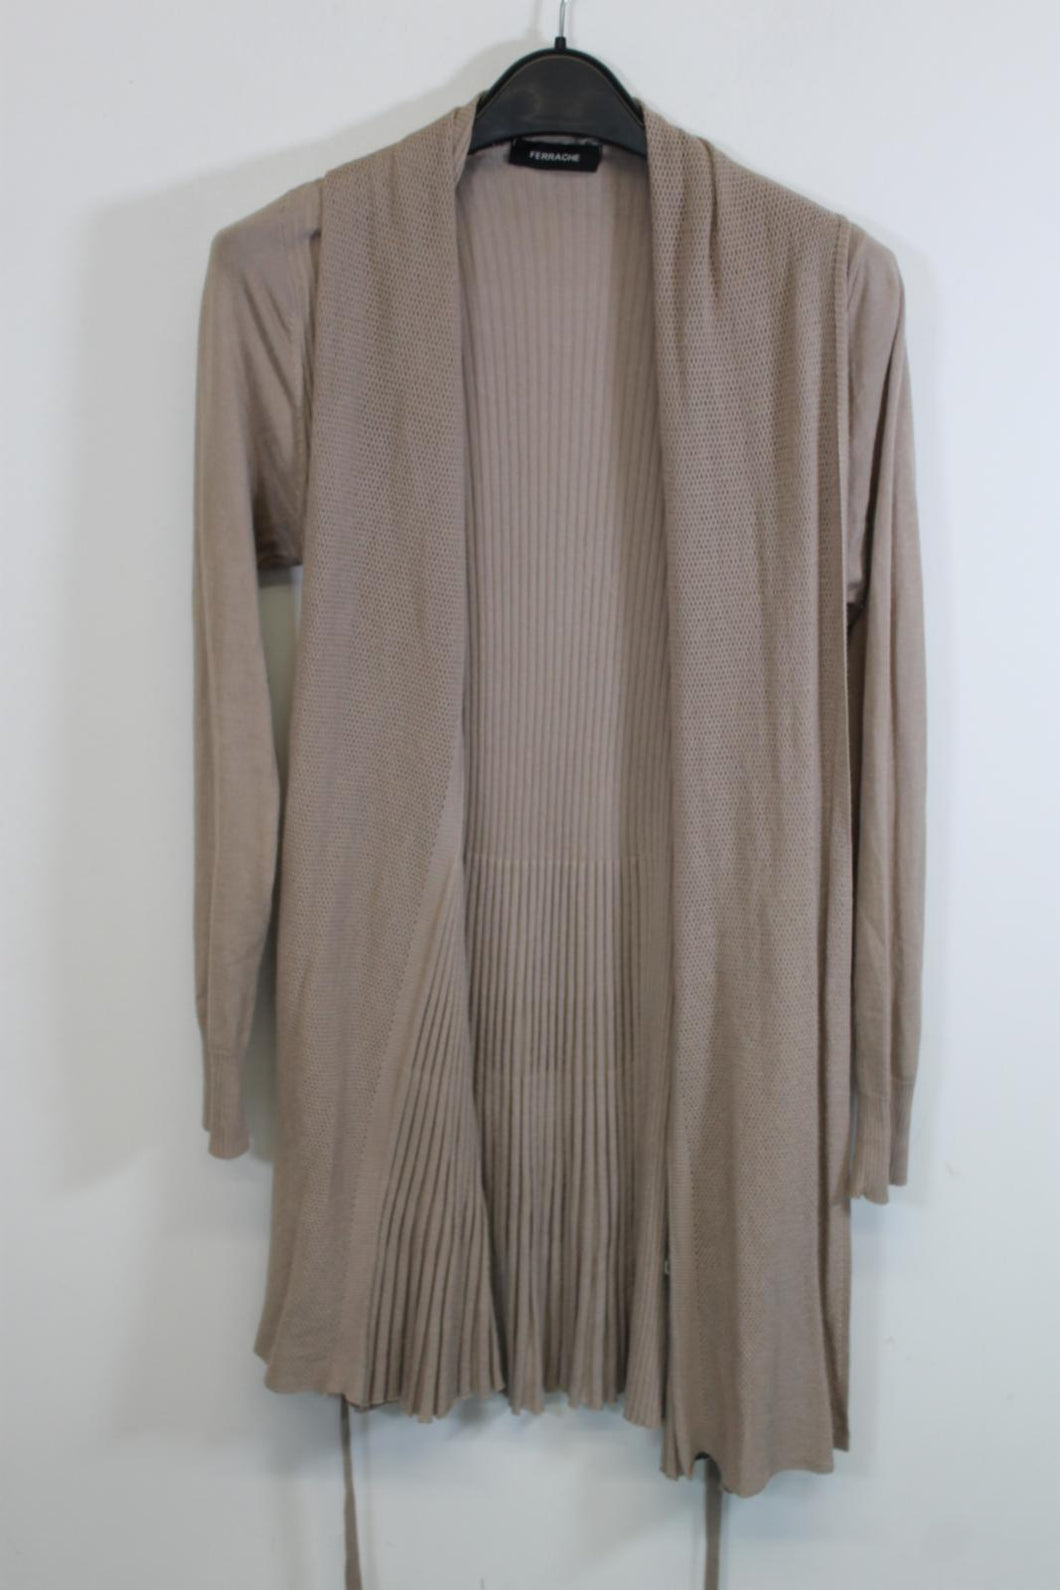 FERRACHE Ladies Beige Cashmere Blend Long Sleeve Ribbed Knitted Cardigan Size L